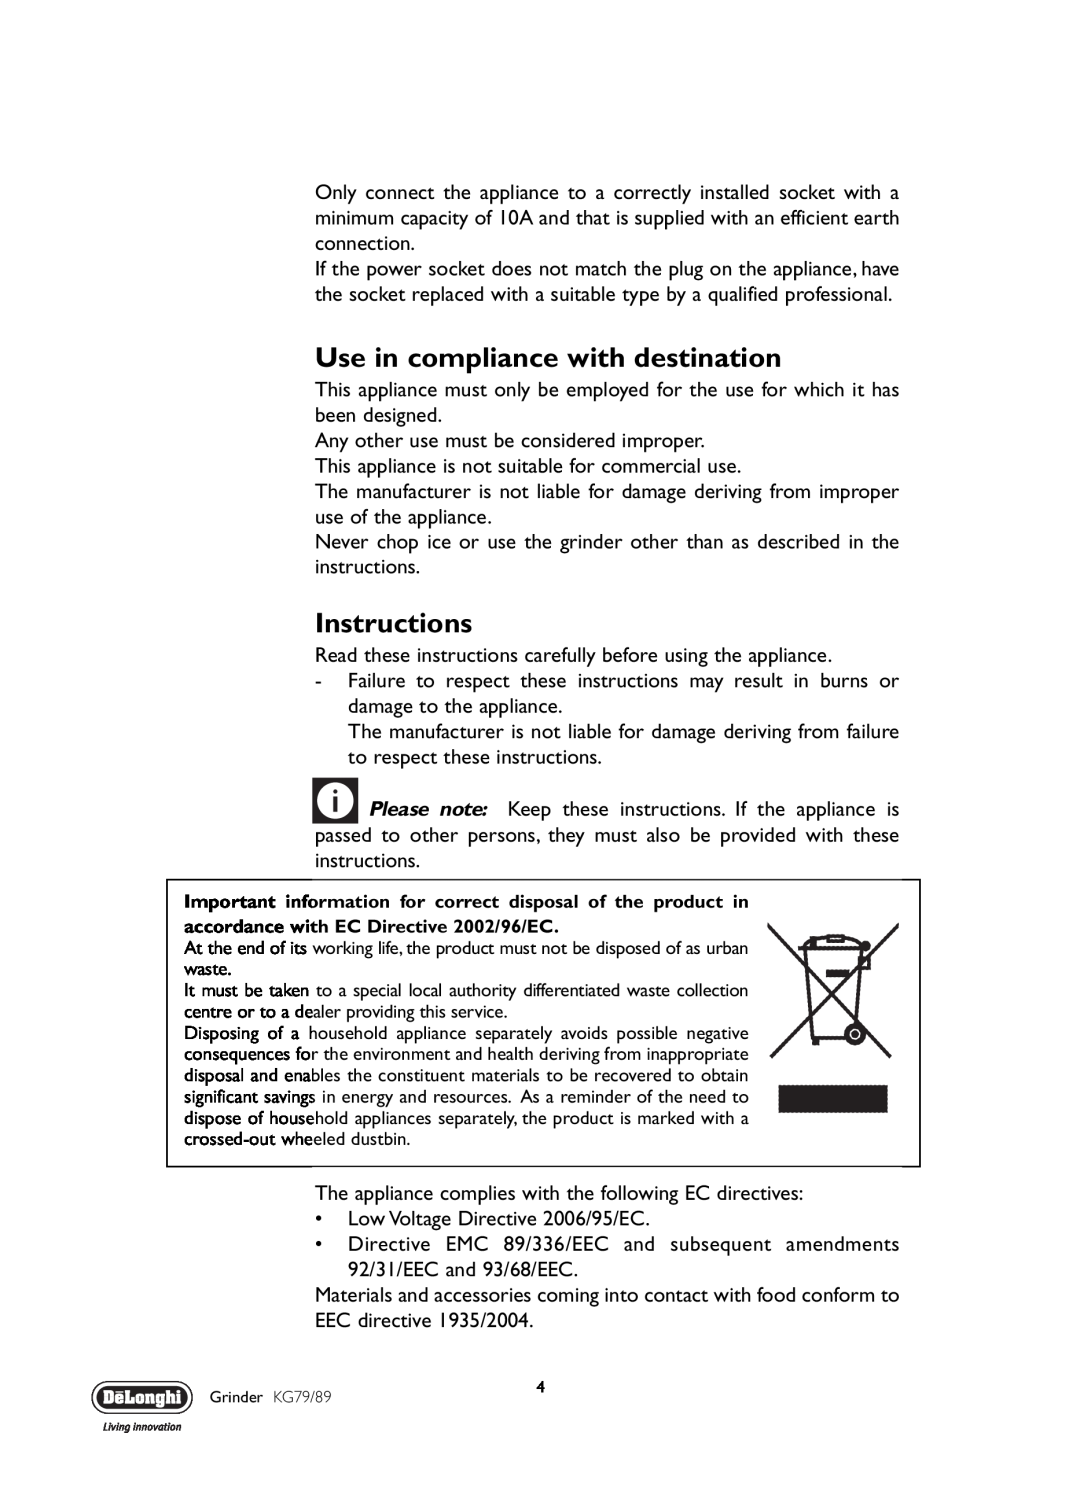 DeLonghi KG 79, KG 89 manual Use in compliance with destination, Instructions 